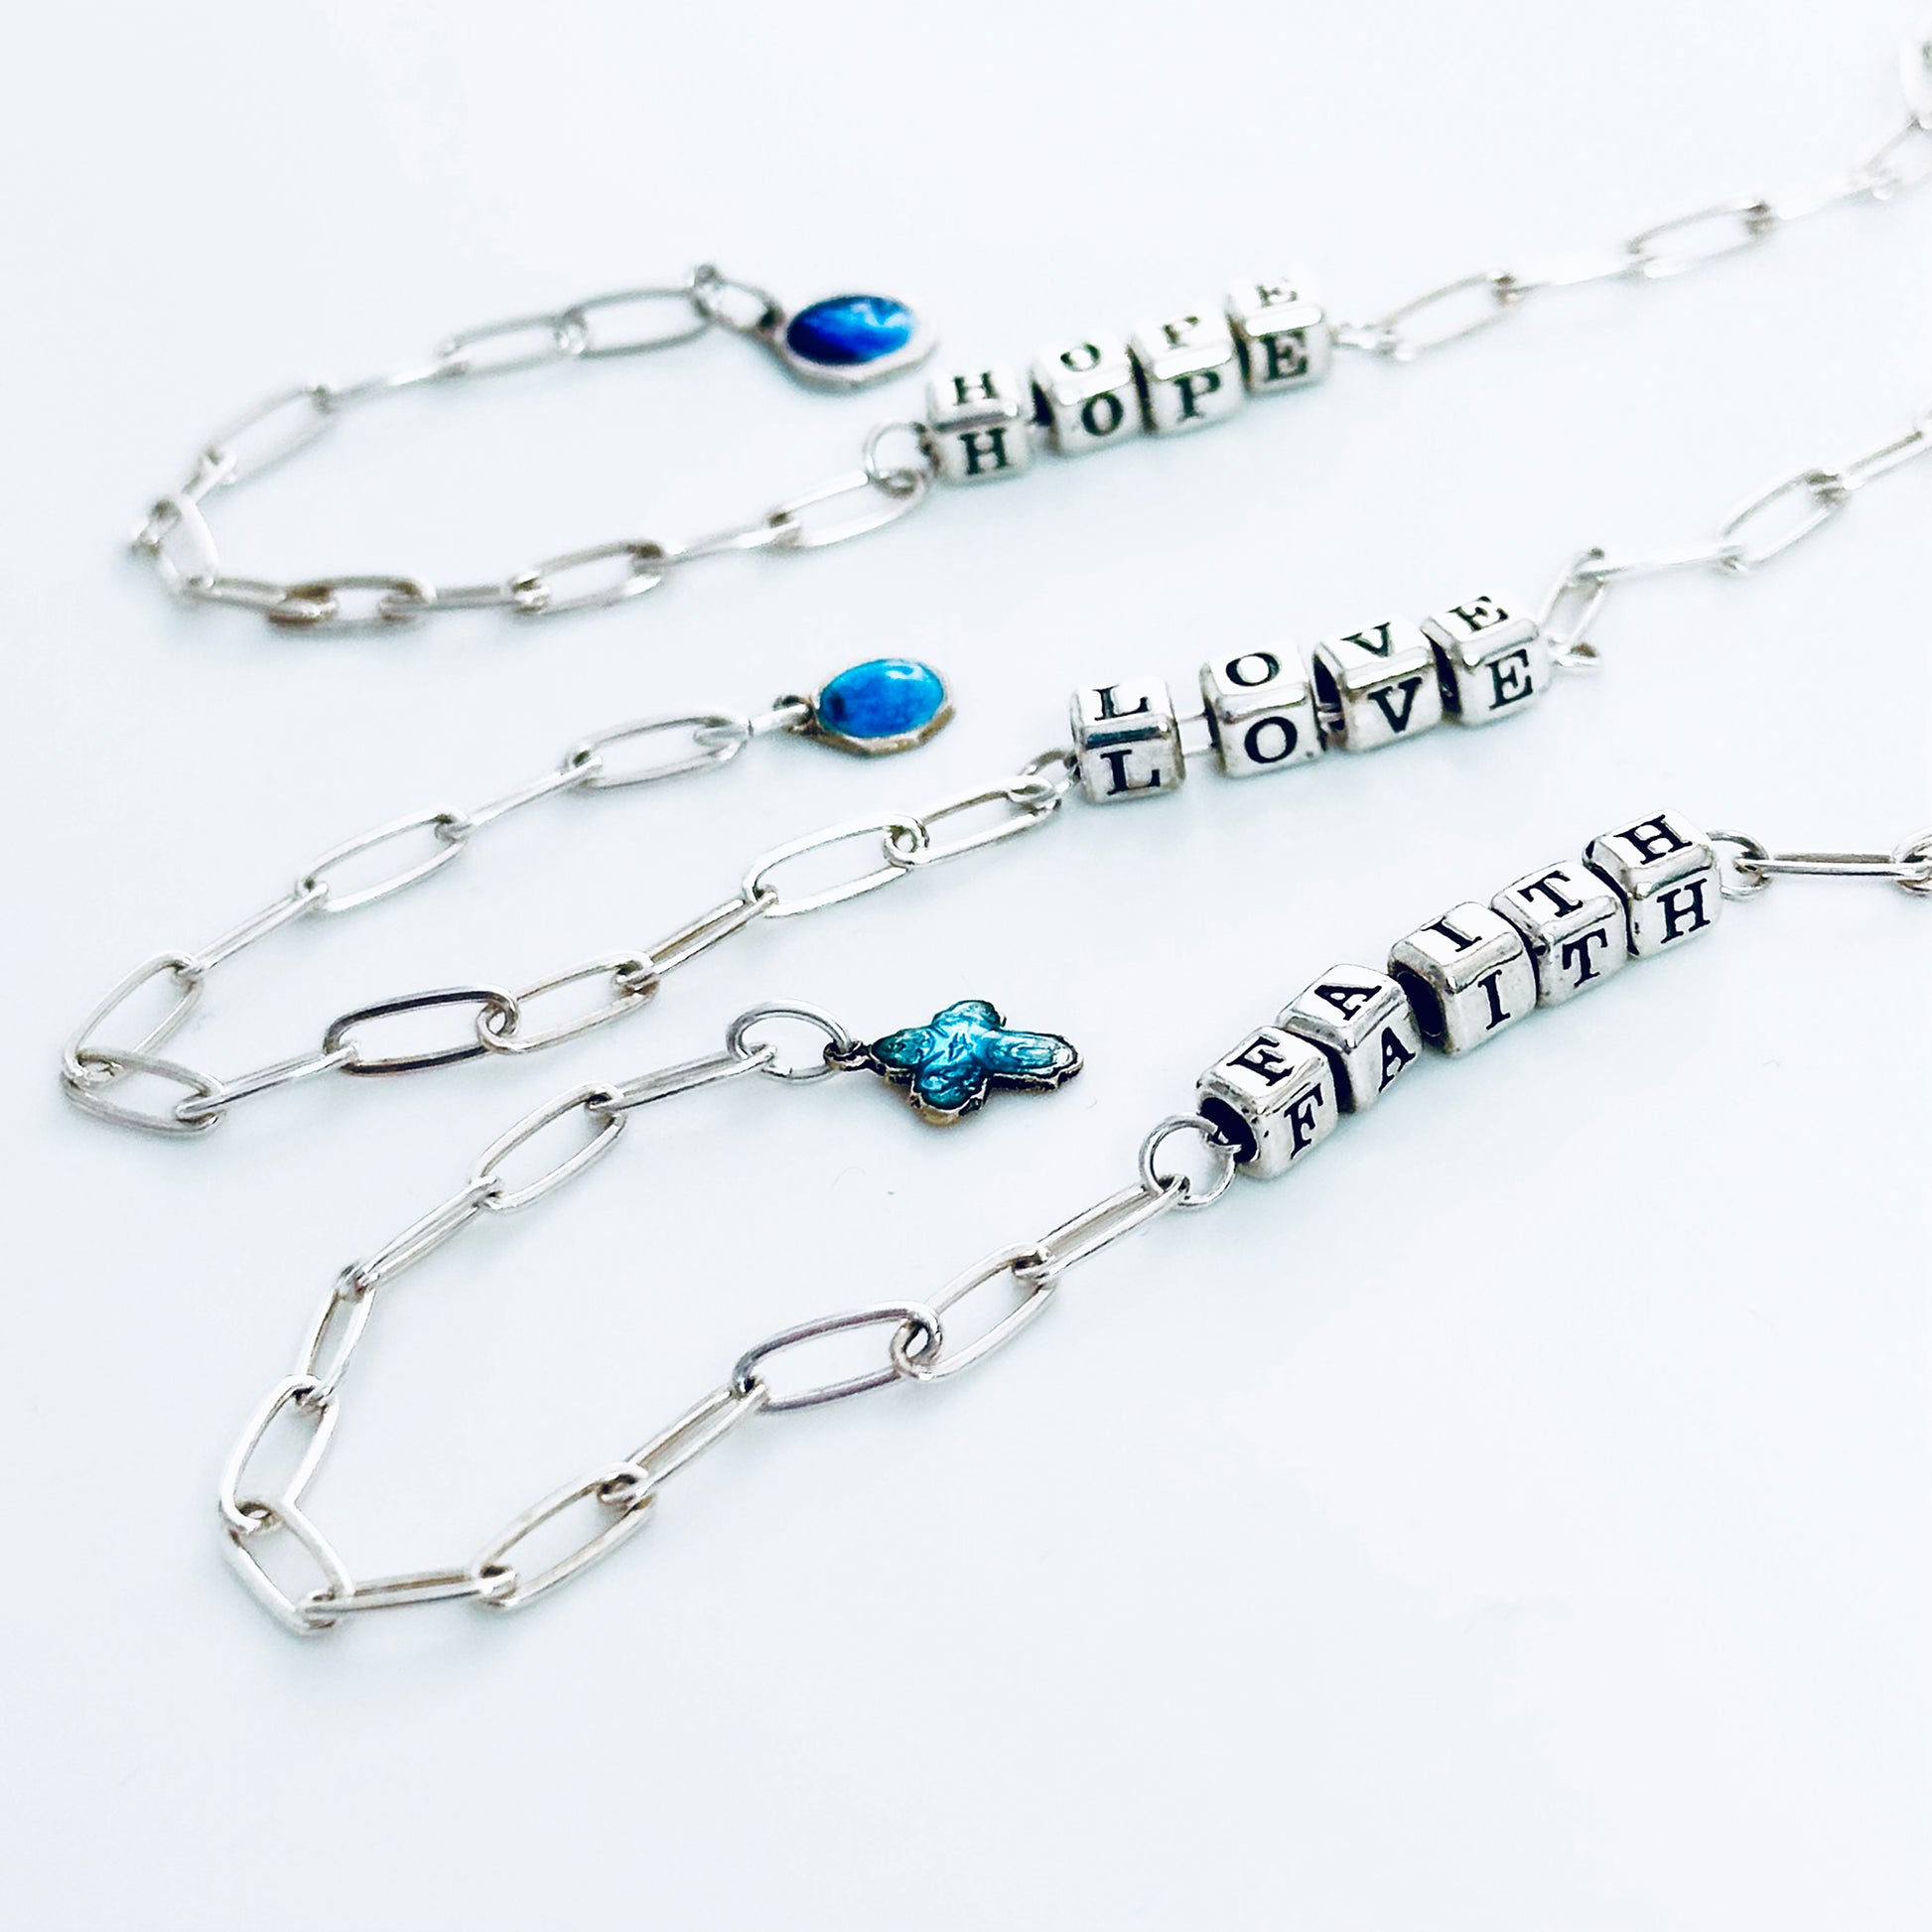 Delicate Hope Love Faith Sterling Silver Gift Bracelets with vintage French blue enamel religious charms